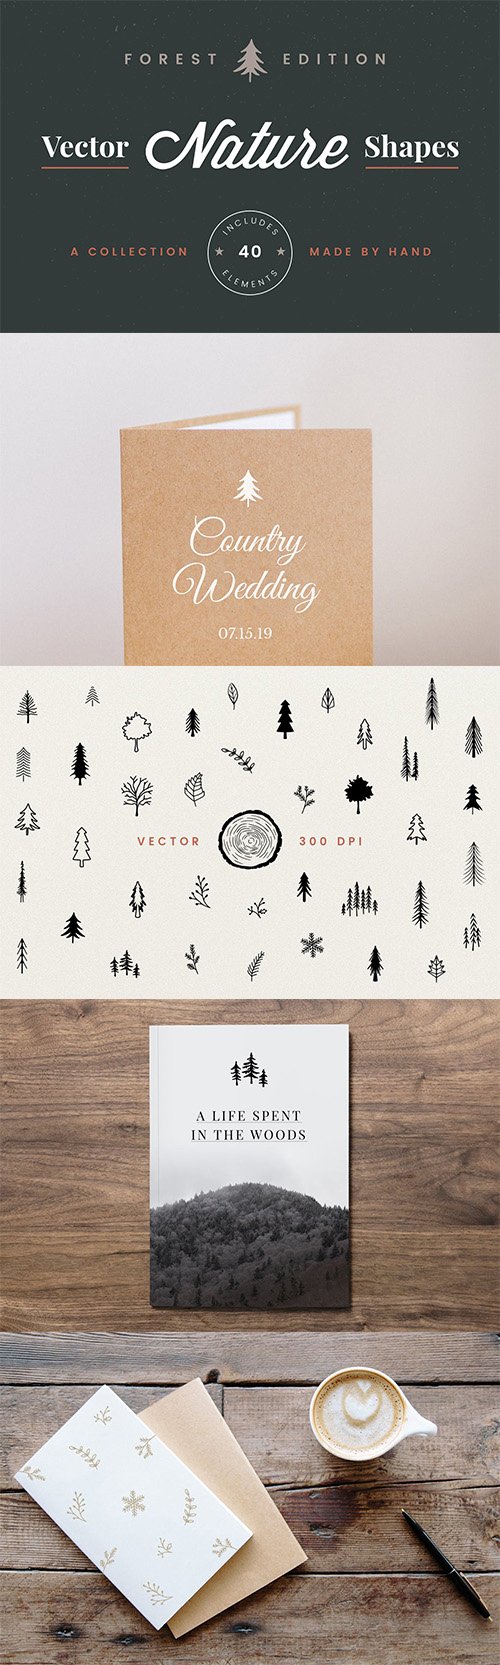 Vector Nature Shapes: Forest Edition